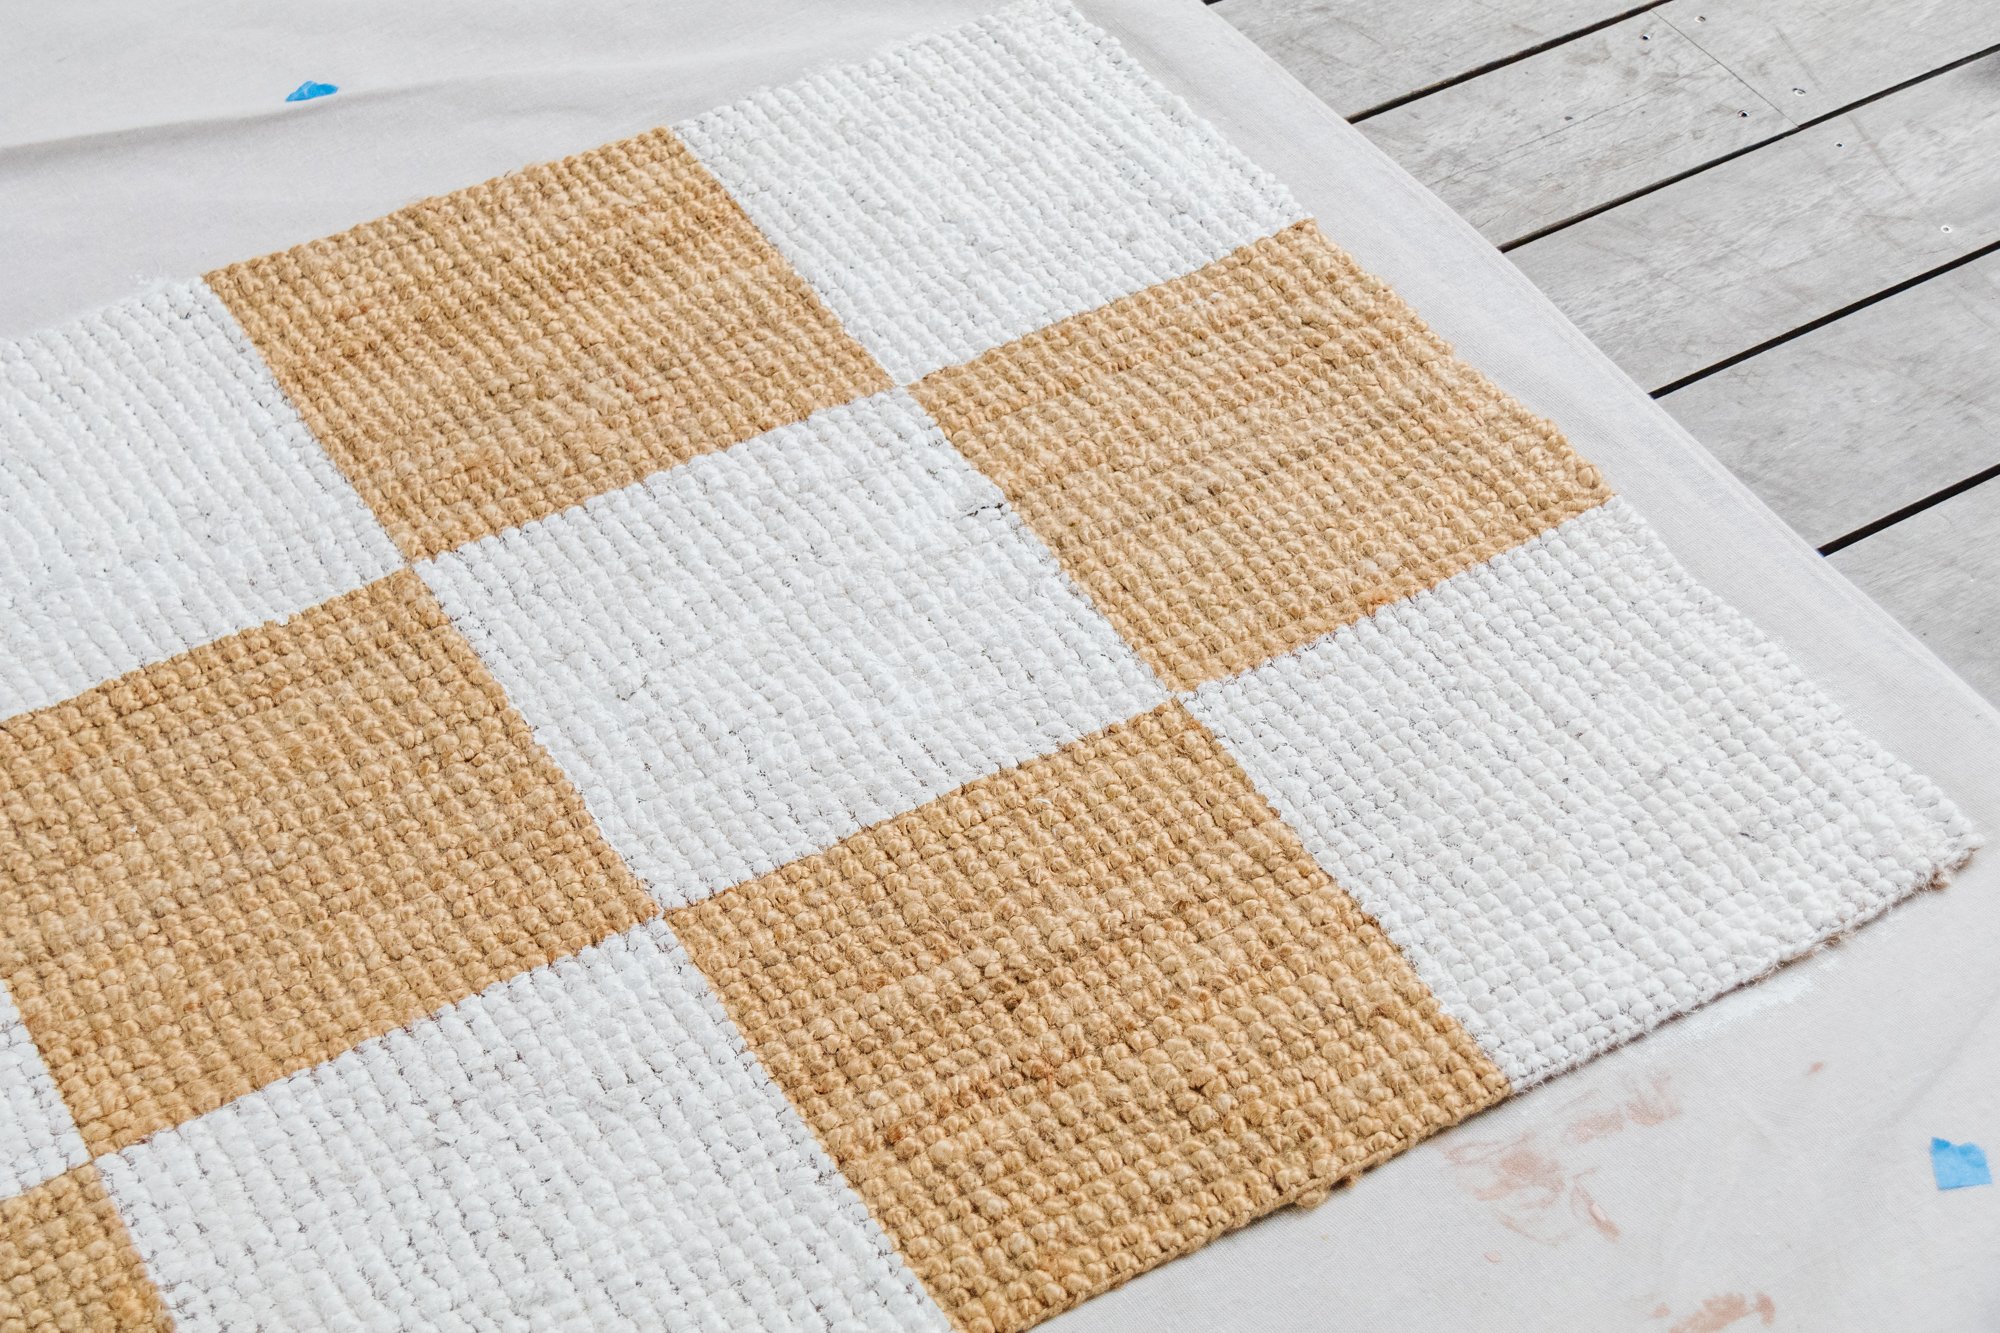 DIY: How to Paint a Jute Rug!